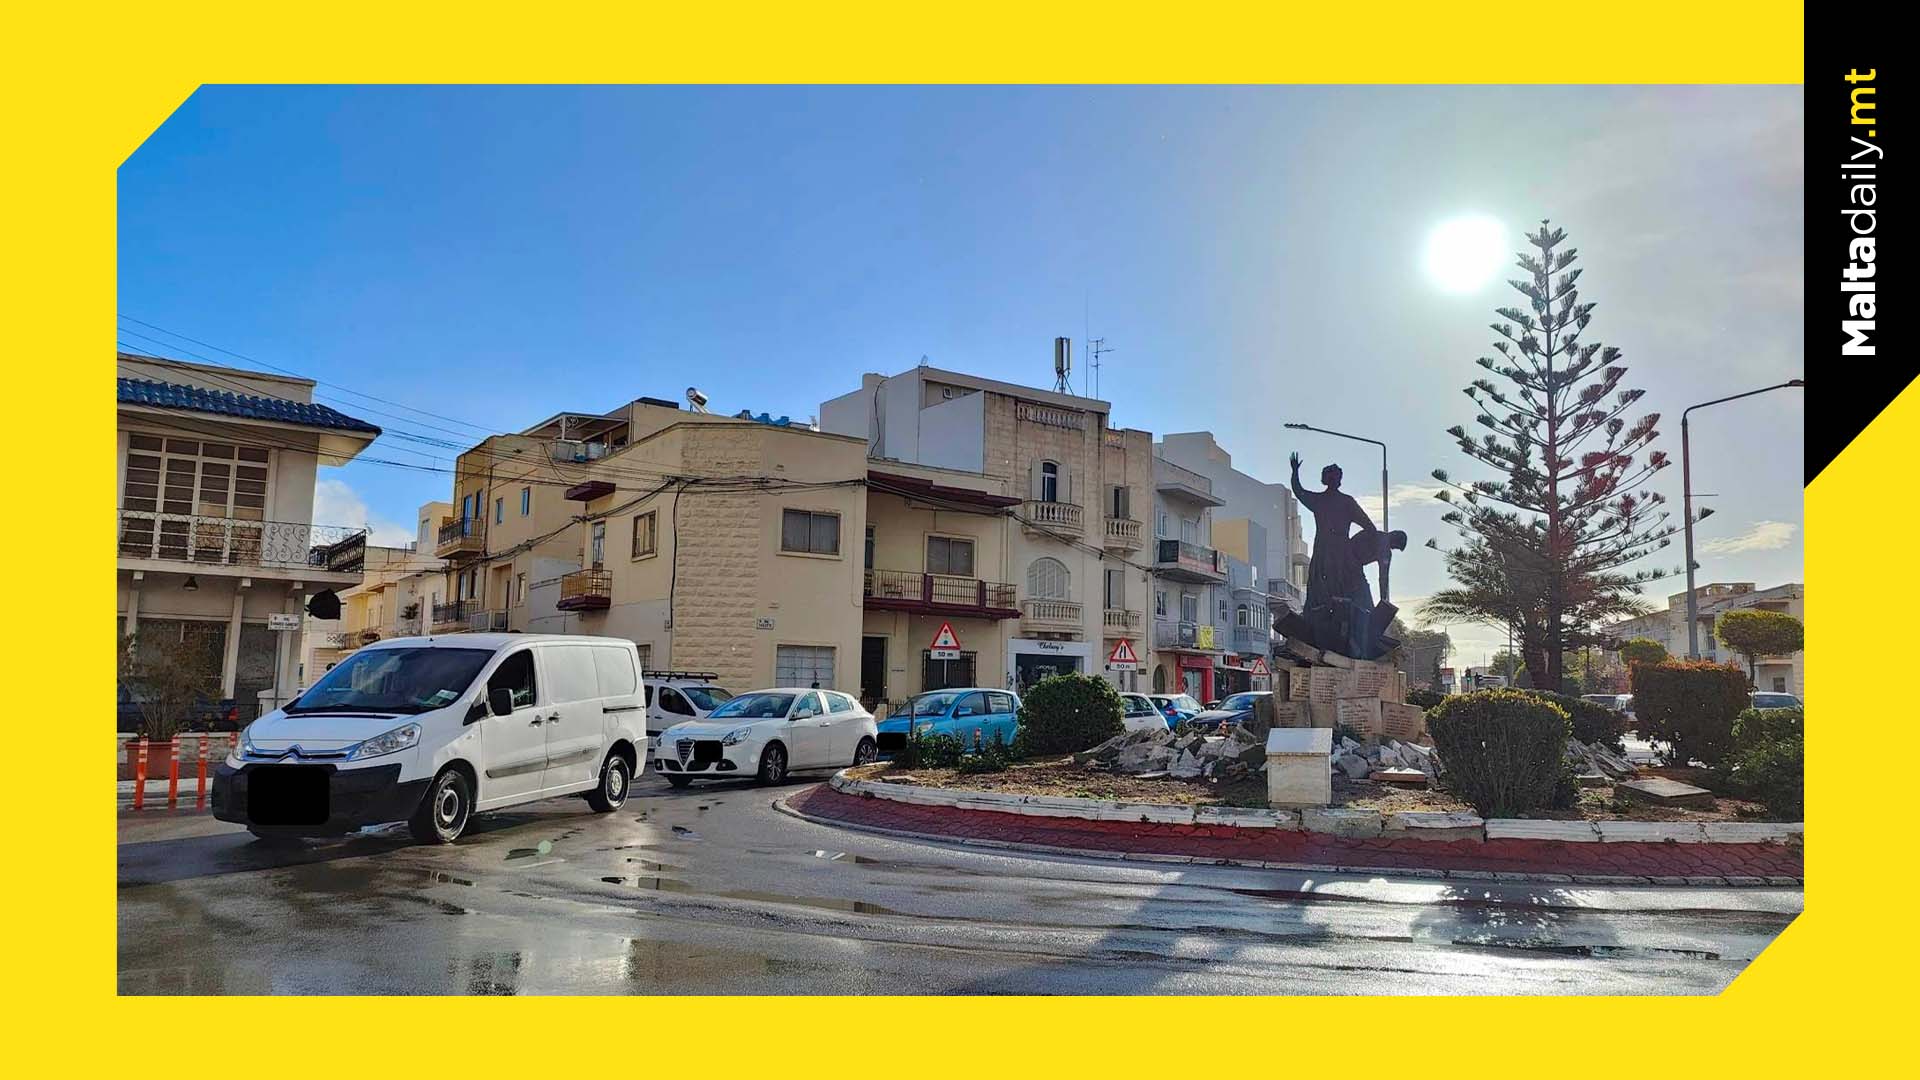 Total traffic gridlock reported in Mosta